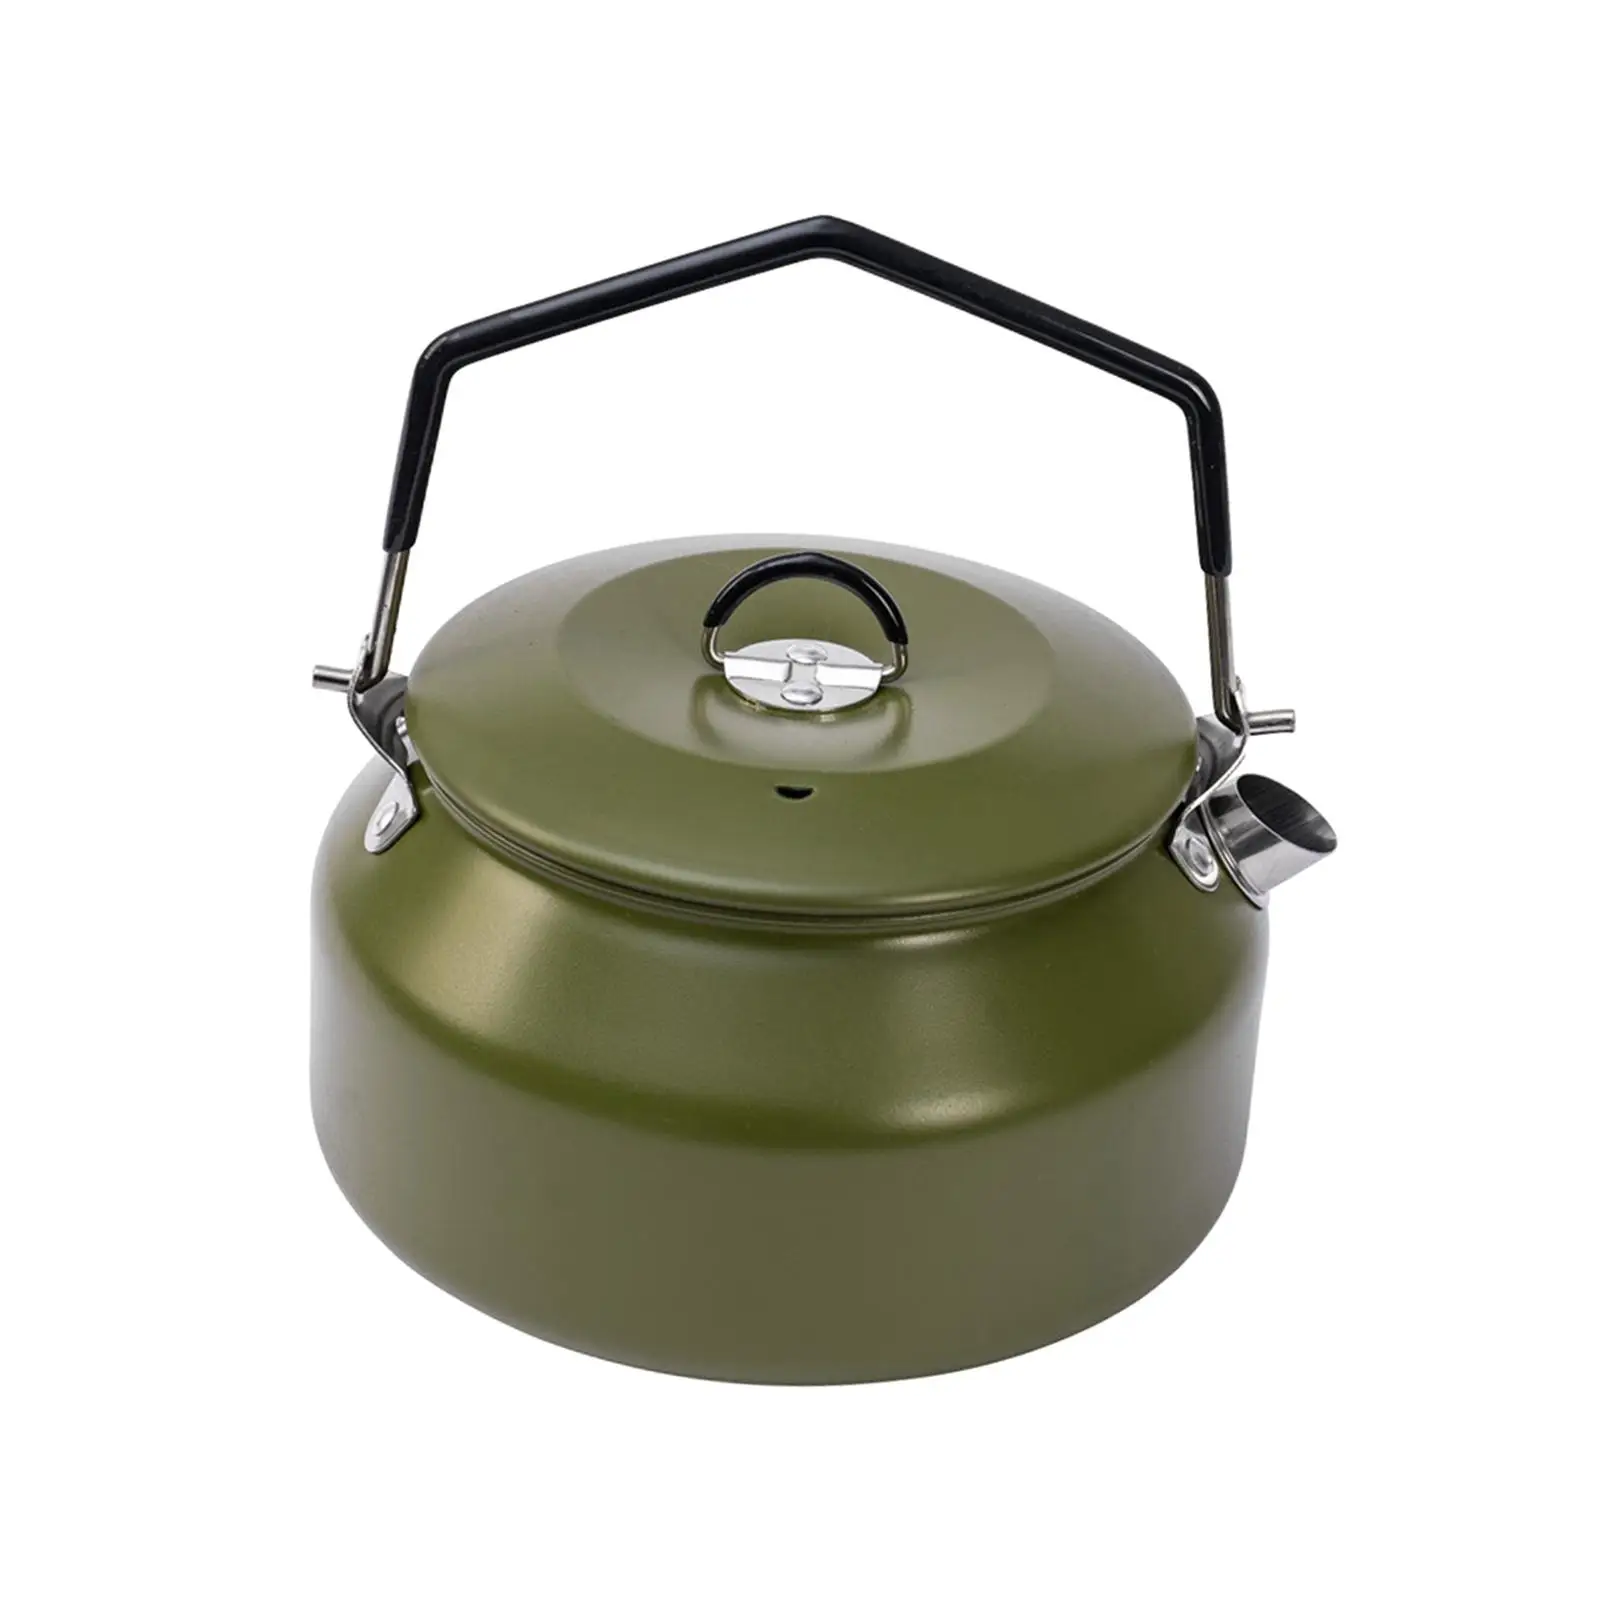 1L Camping Water Kettle Teapot Cook Pot Lightweight Anti Scald Handle Teakettle for Camp Mountaineering Fishing Campfire Travel